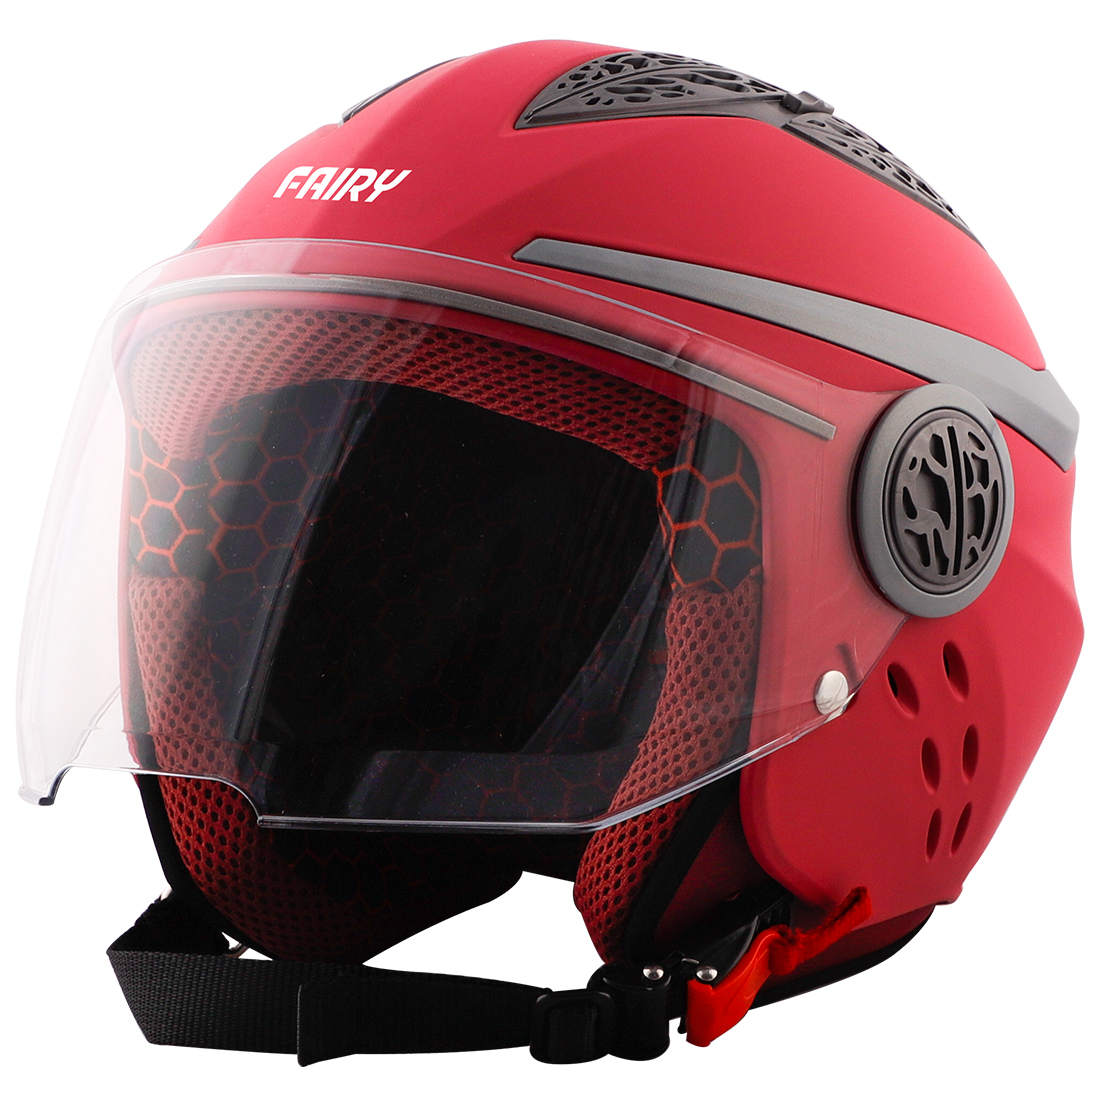 Steelbird Fairy Specially Designed ISI Certified Helmet For Girls || Womens  (Glossy Cherry Red With Clear Visor)